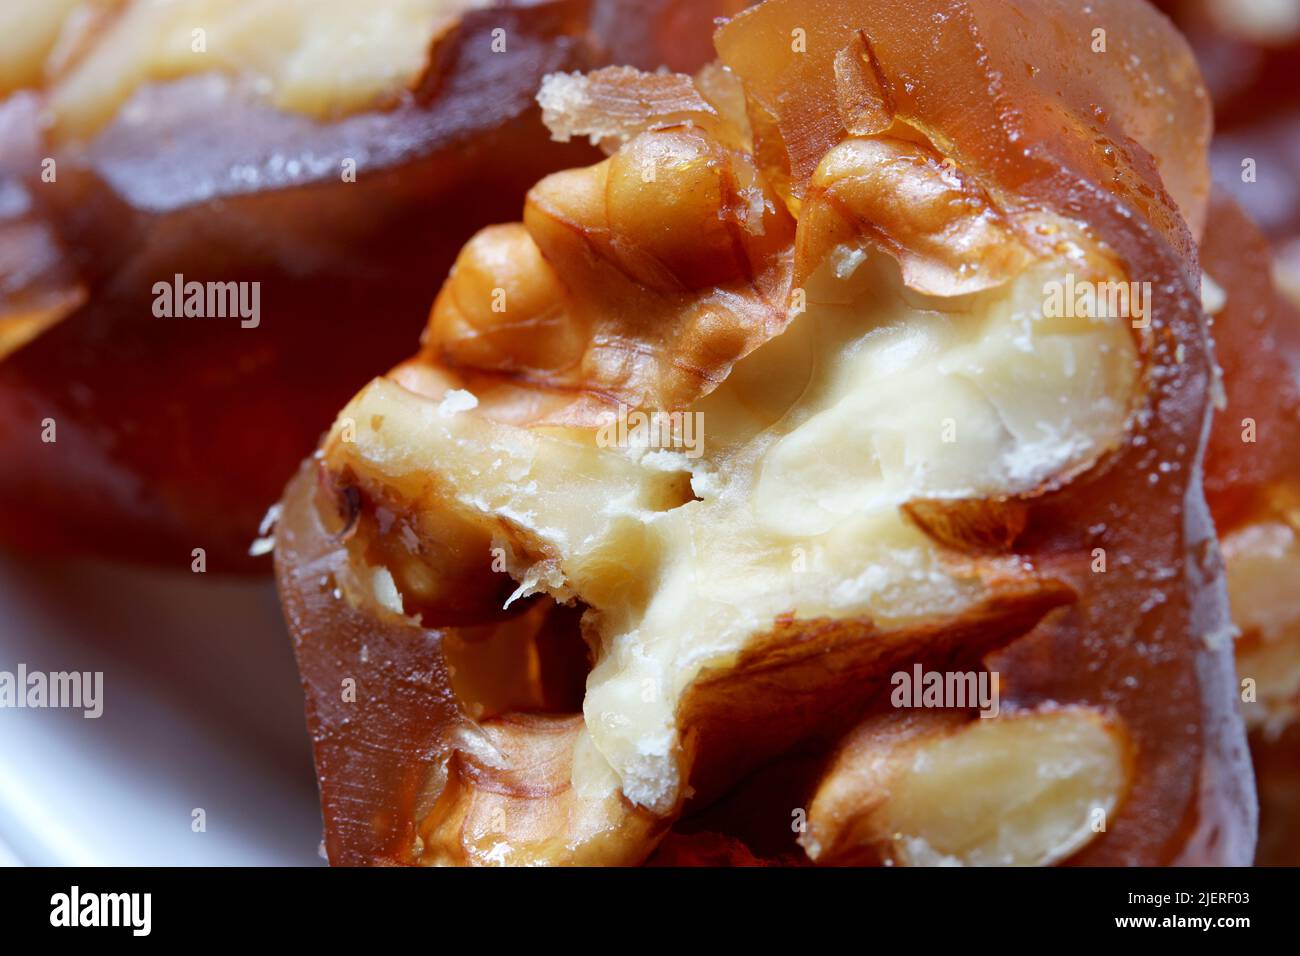 Dried fruit pulp with walnuts Stock Photo